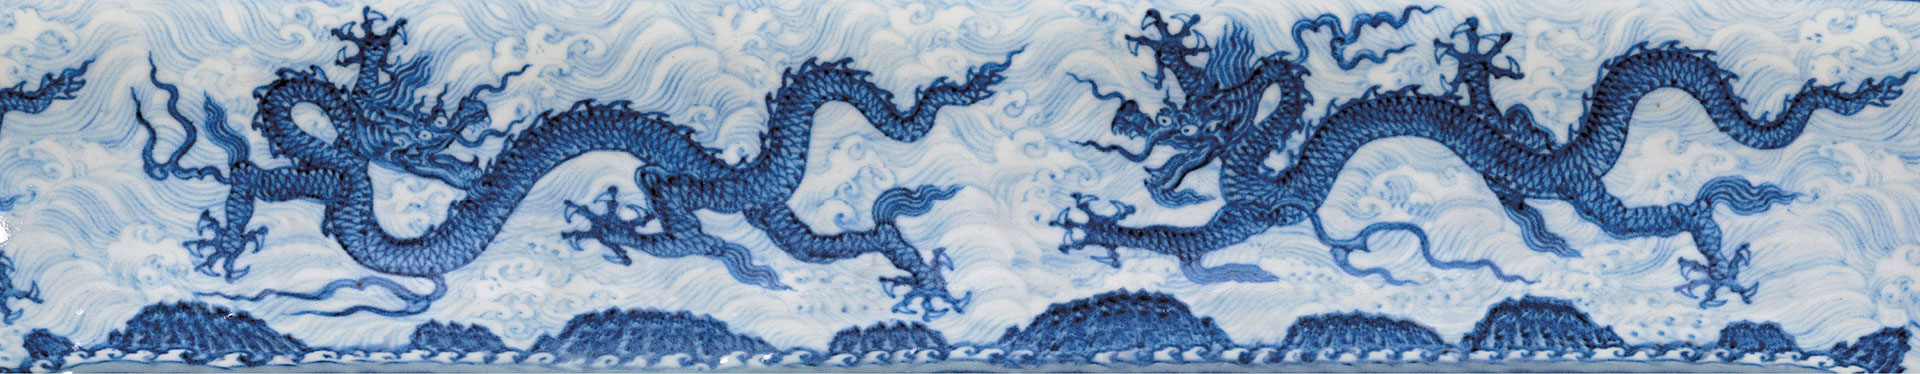 chinese-ceramics-and-works-of-art-banner-FINAL_15_1_20170103145606.jpg